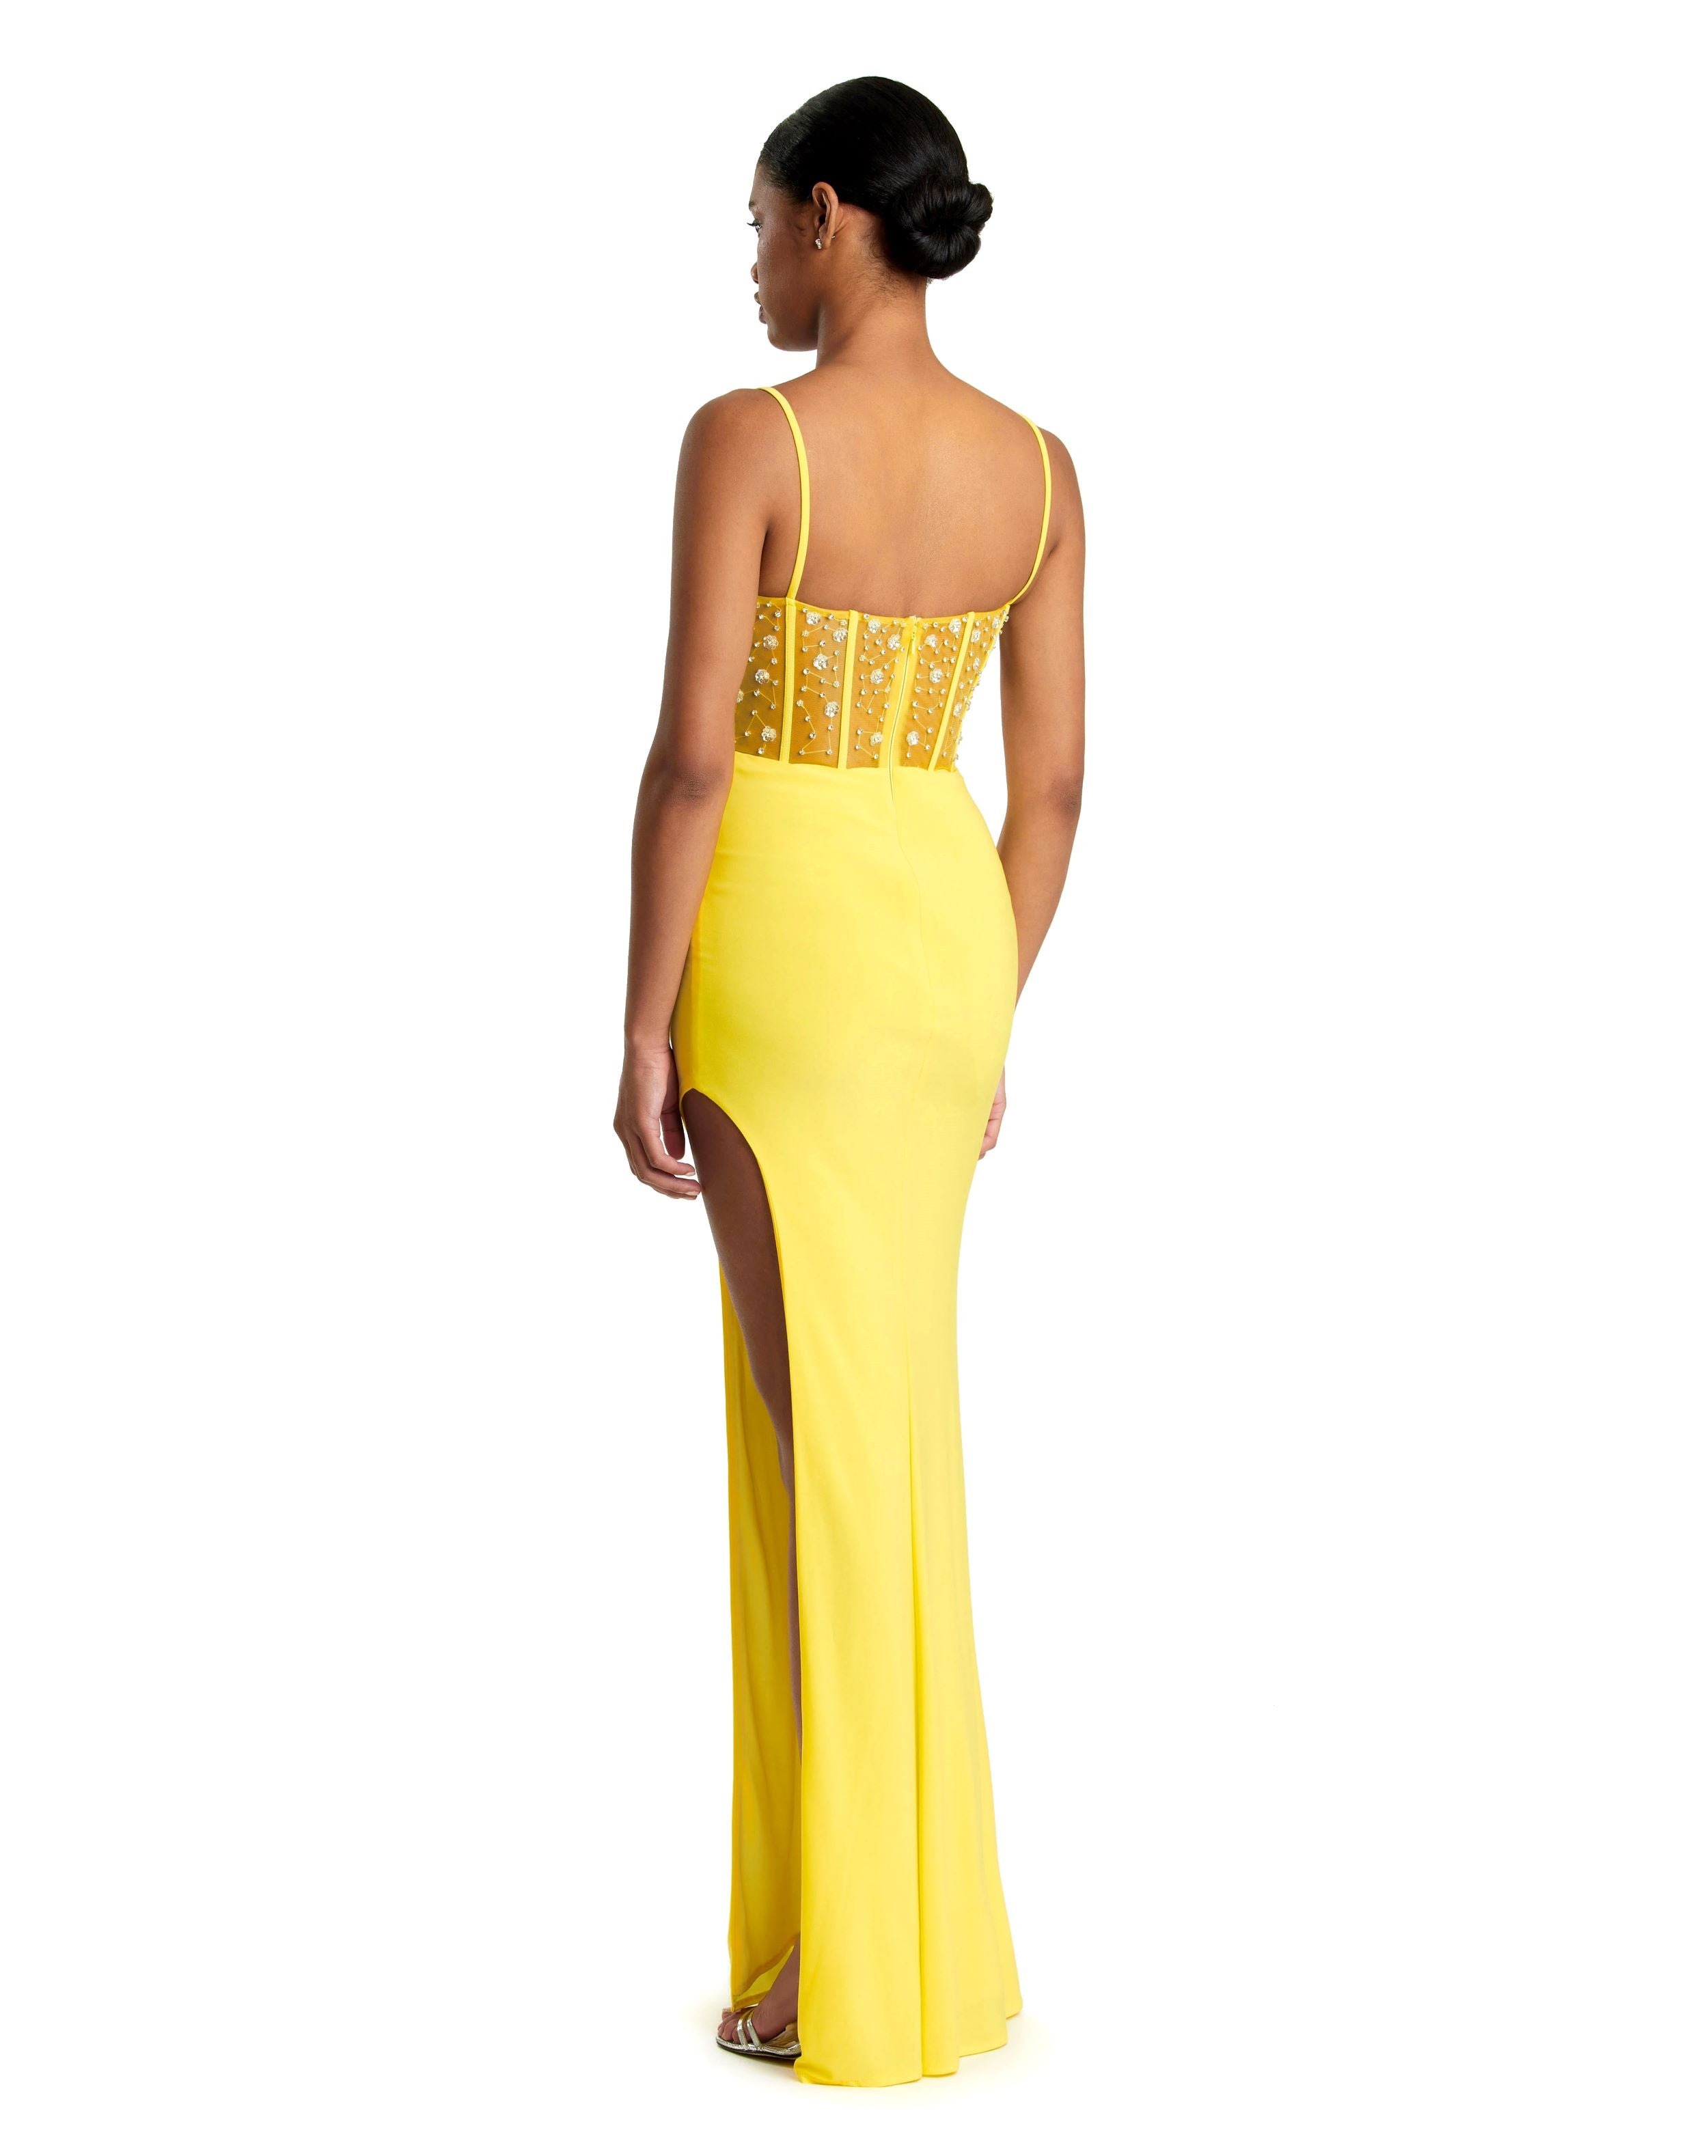 Spaghetti Strap Beaded Sheer Bodice Gown with Slit - FINAL SALE